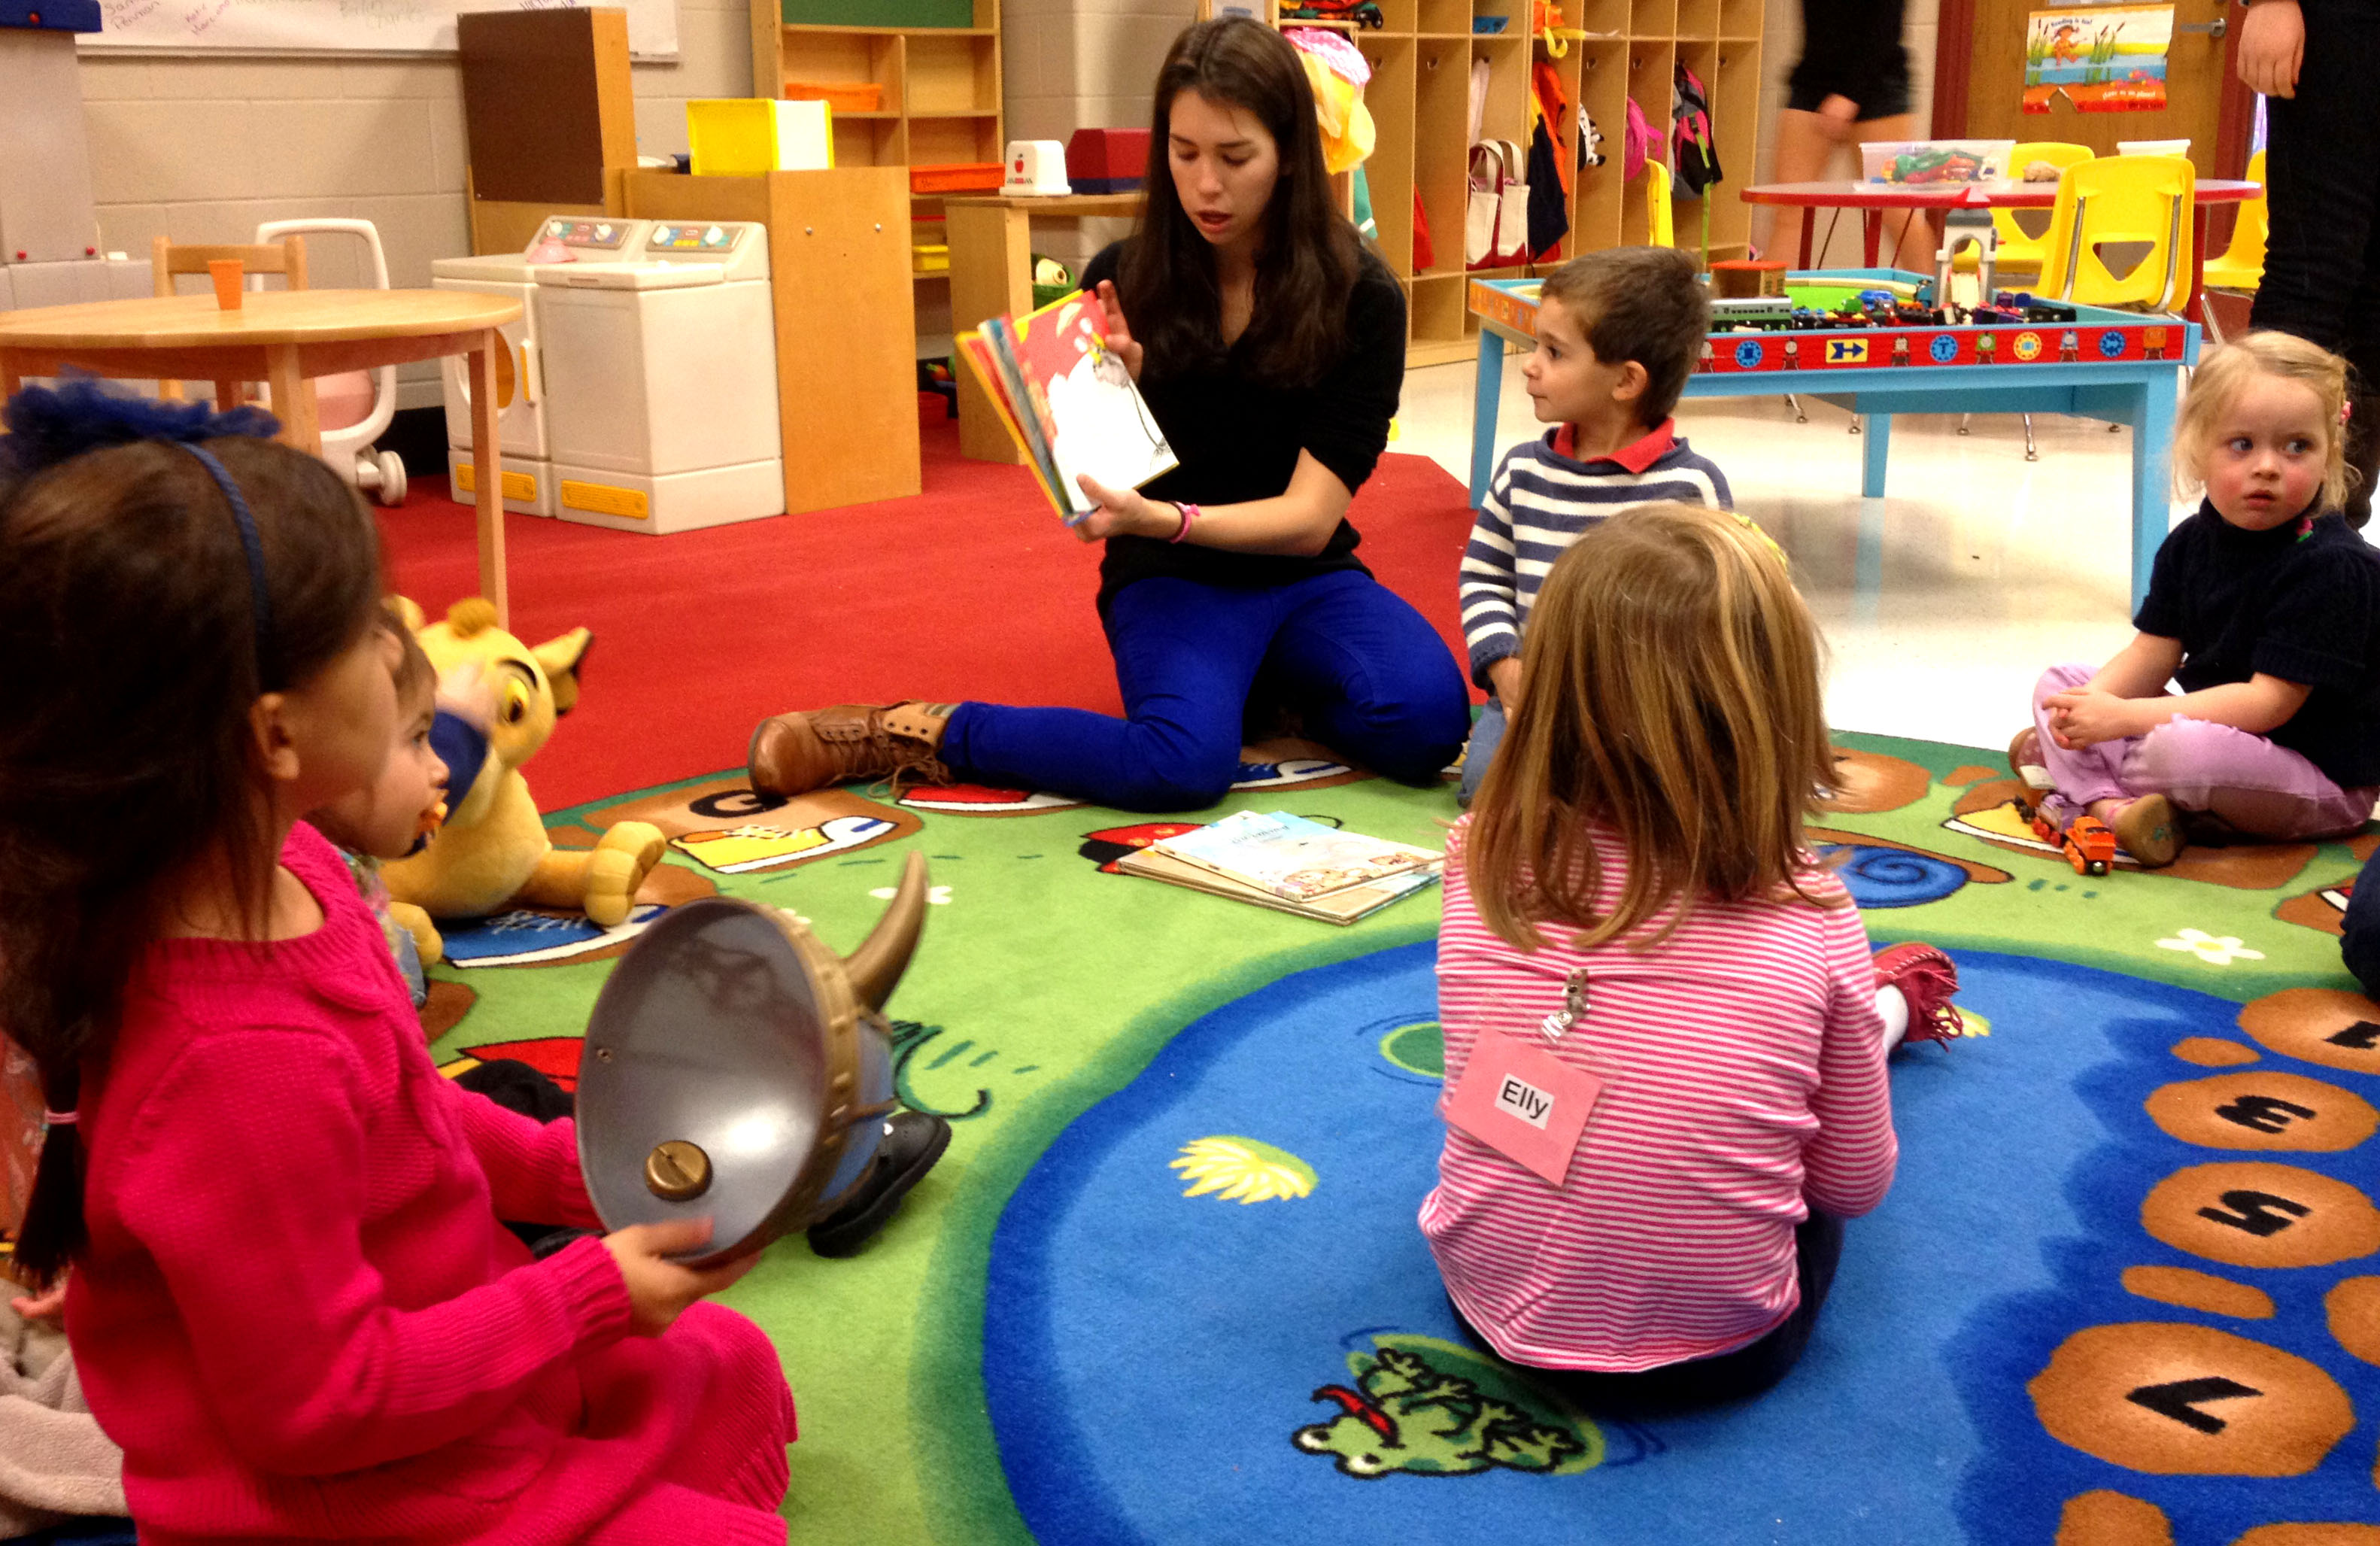 NCHS preschool teaches valuable lessons to child development students